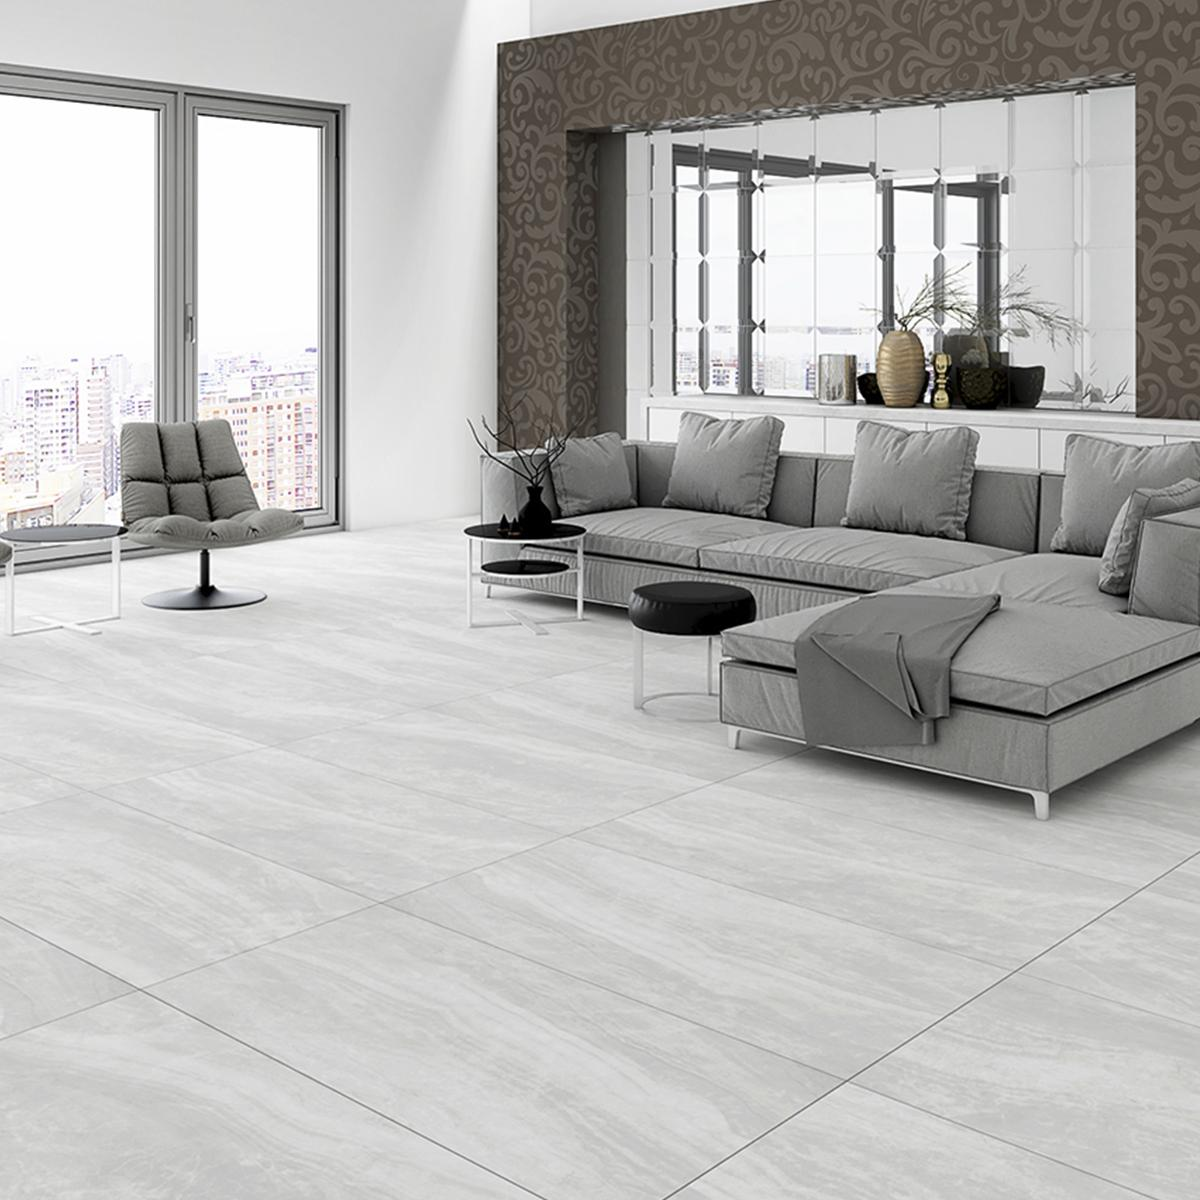 The Benefits of Porcelain Tiles